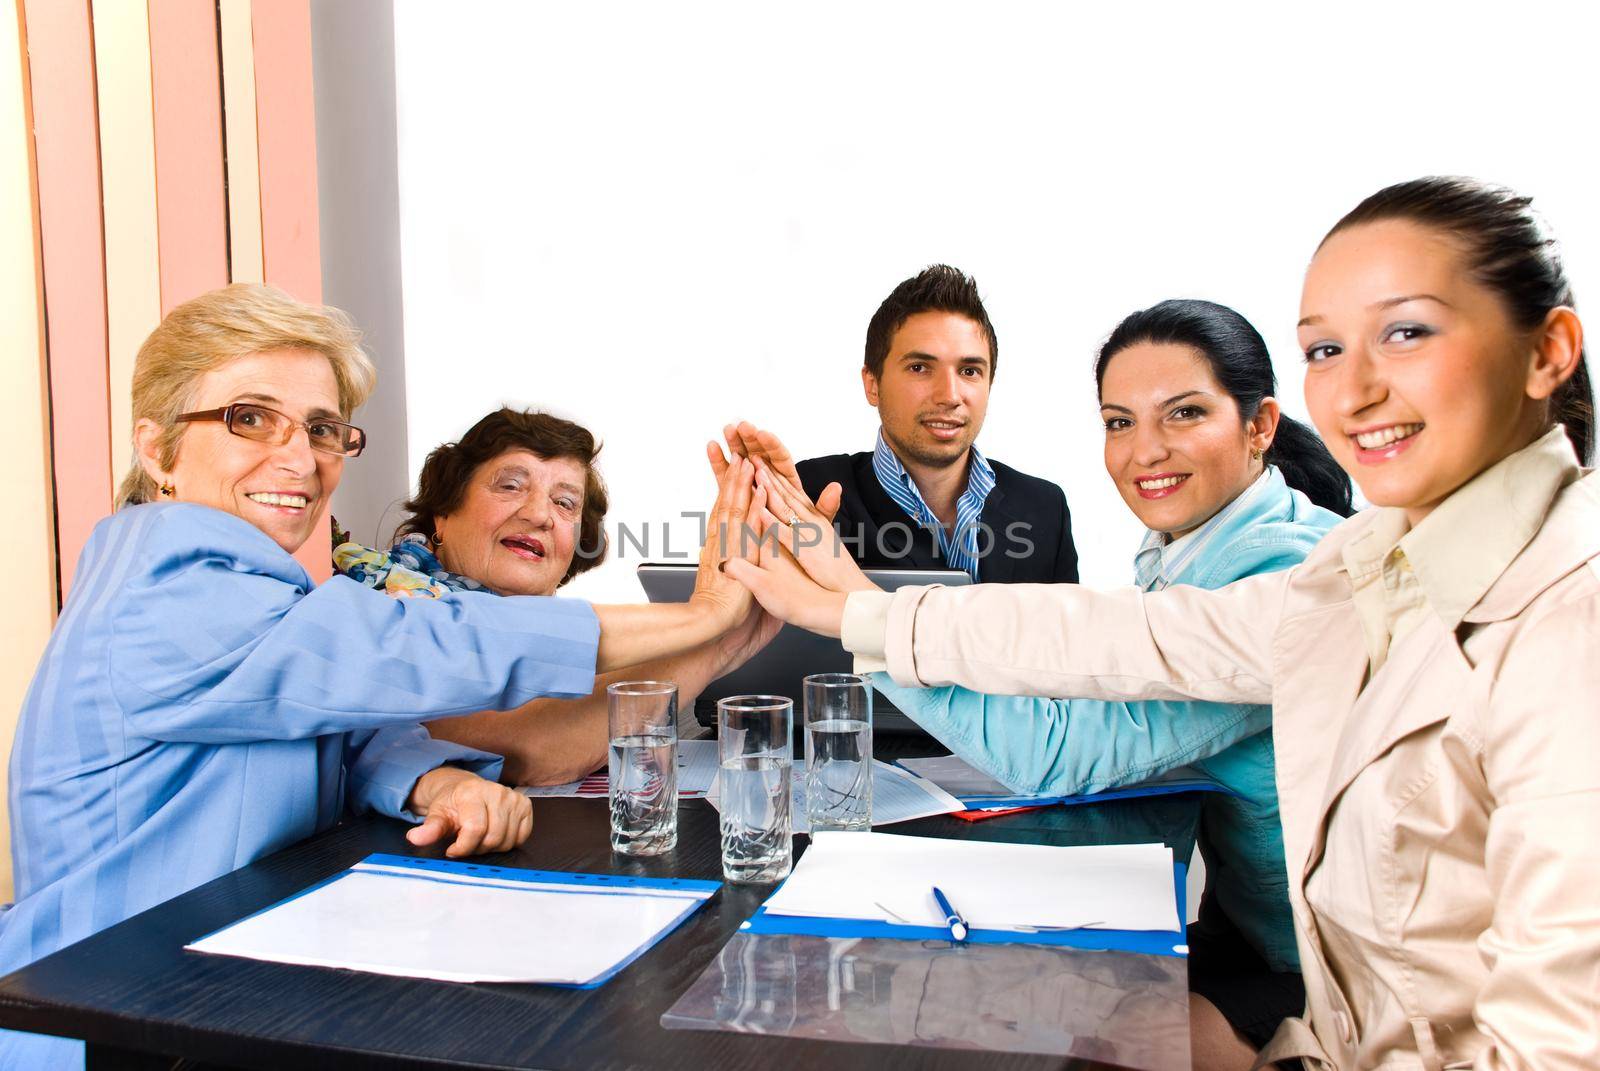 Group of business people giving high five and smiling  at  meeting or team spirit